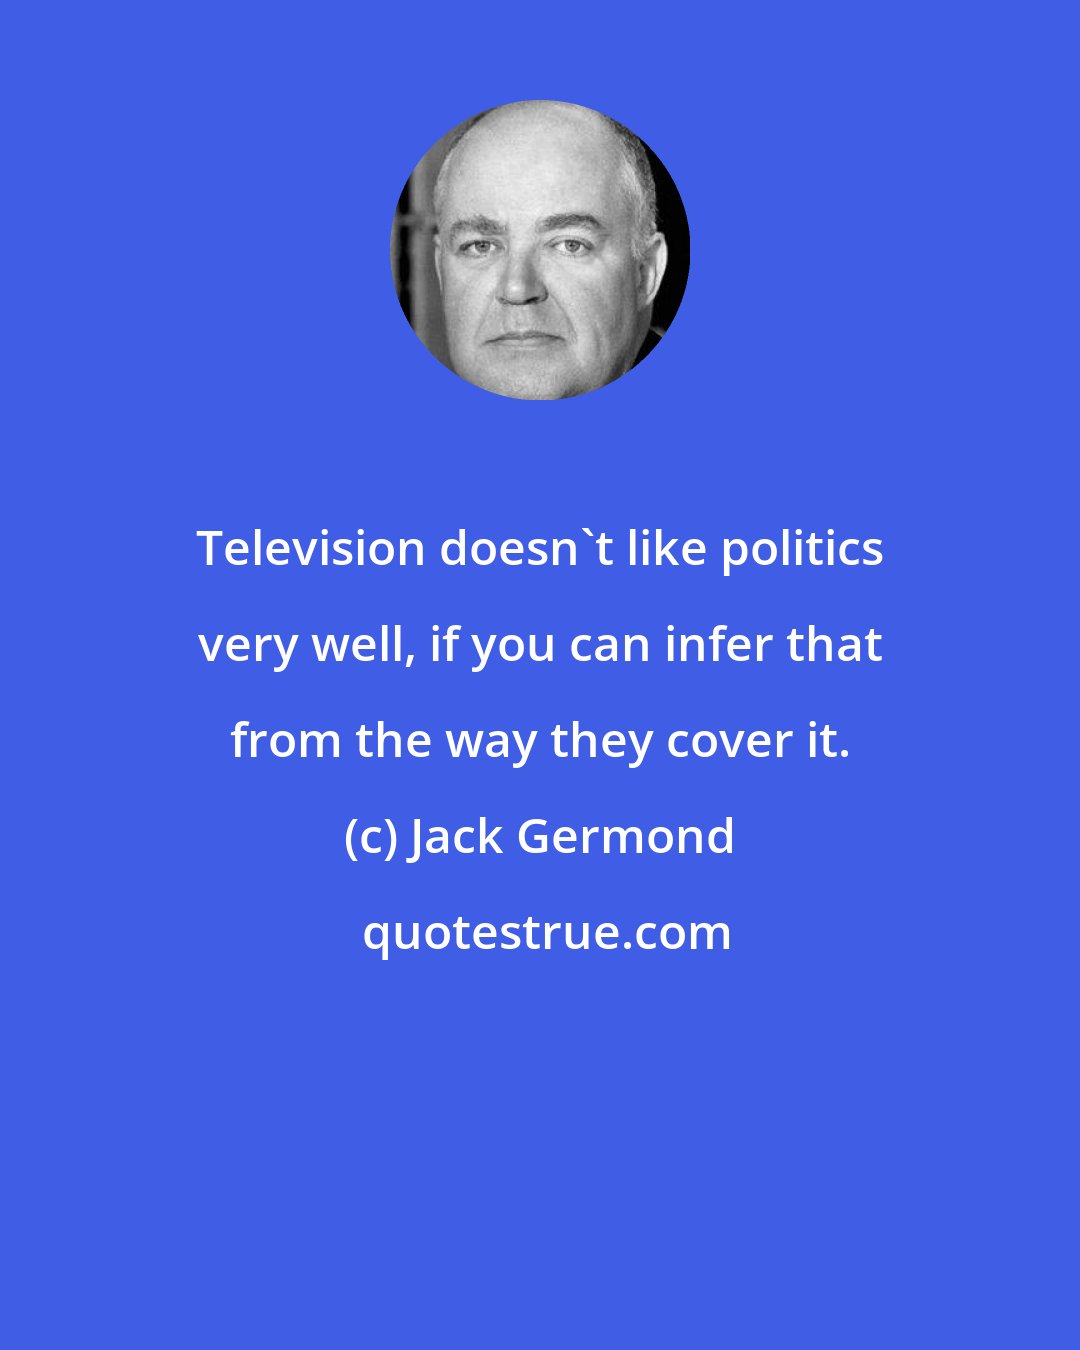 Jack Germond: Television doesn't like politics very well, if you can infer that from the way they cover it.